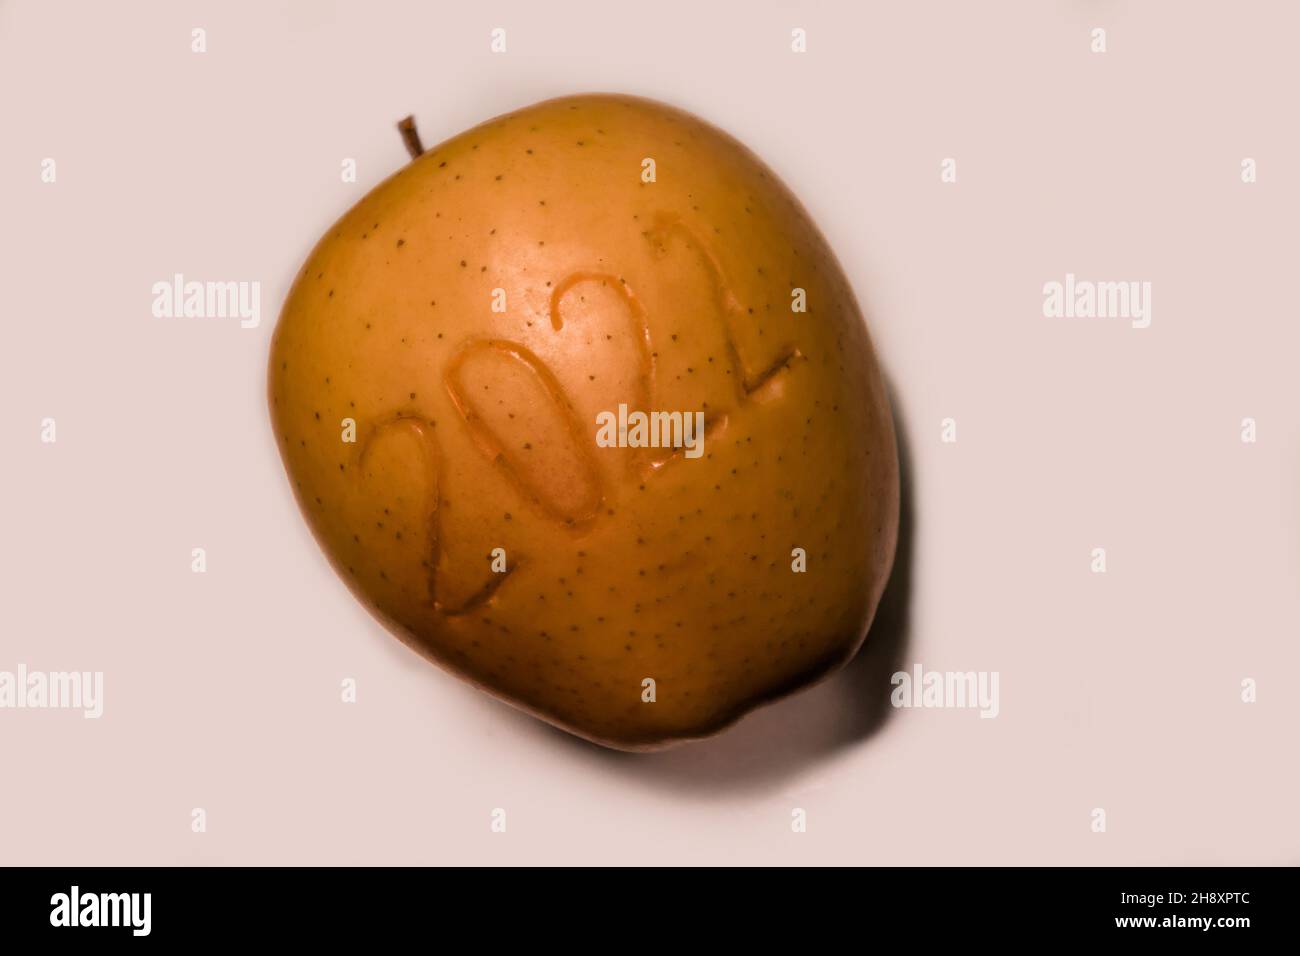 Number 2022, placed on an apple, against a white background.  Stock Photo